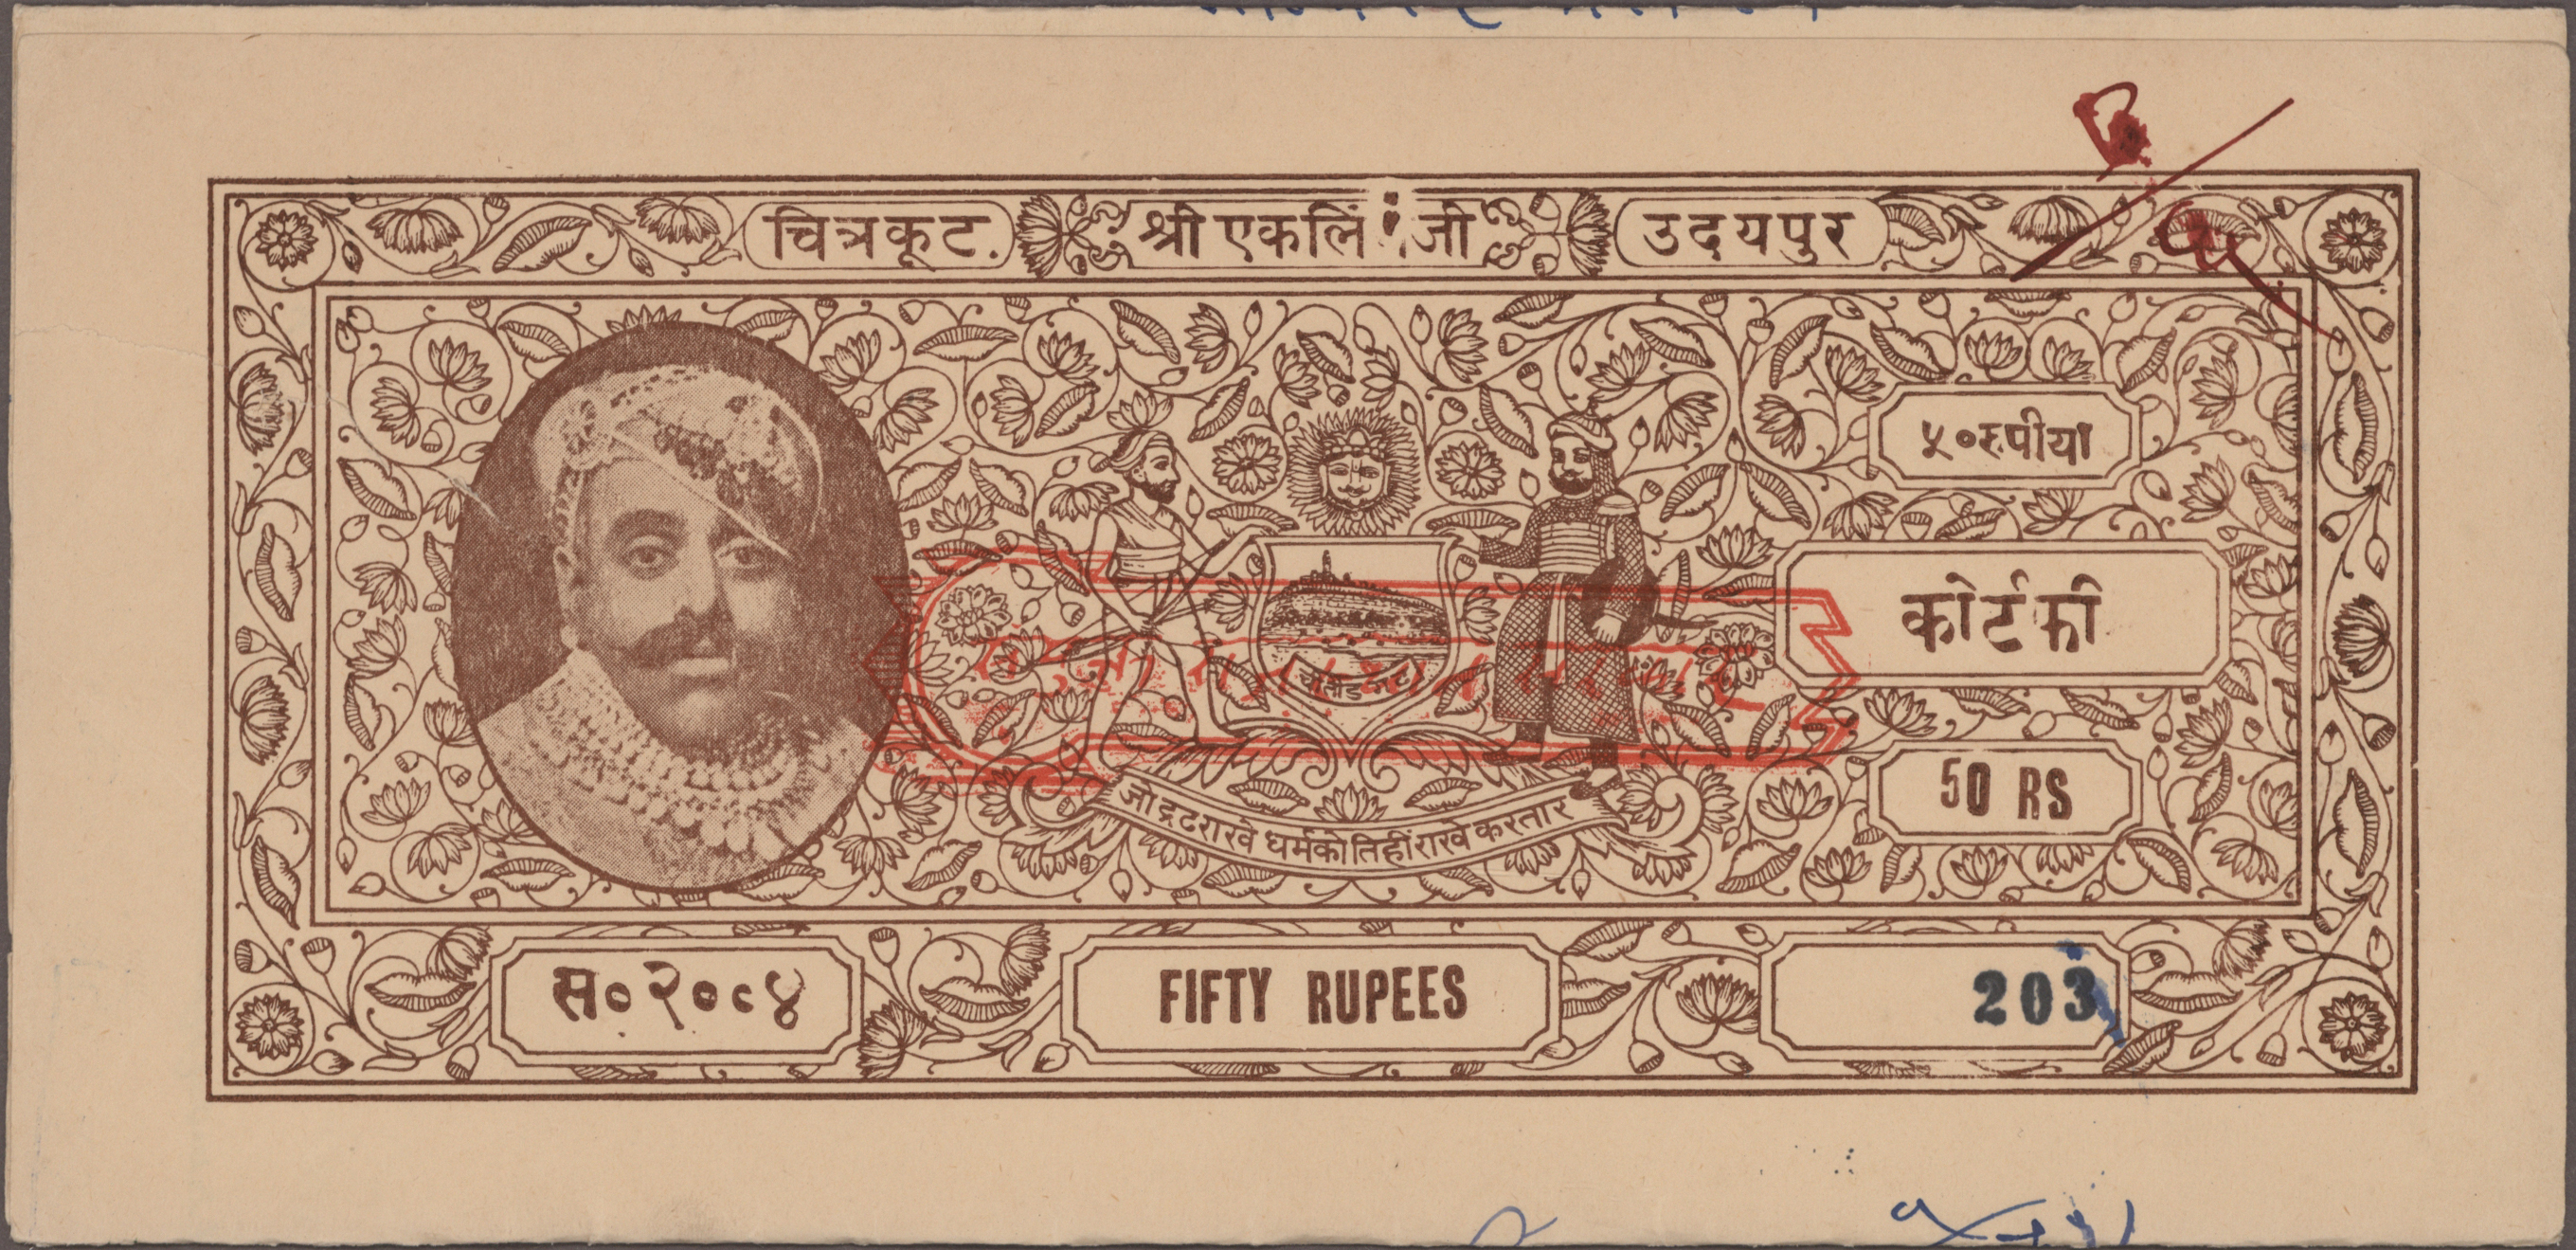 Lot 7340 - Indien - Feudalstaaten  -  Auktionshaus Christoph Gärtner GmbH & Co. KG 54th AUCTION - Day 4